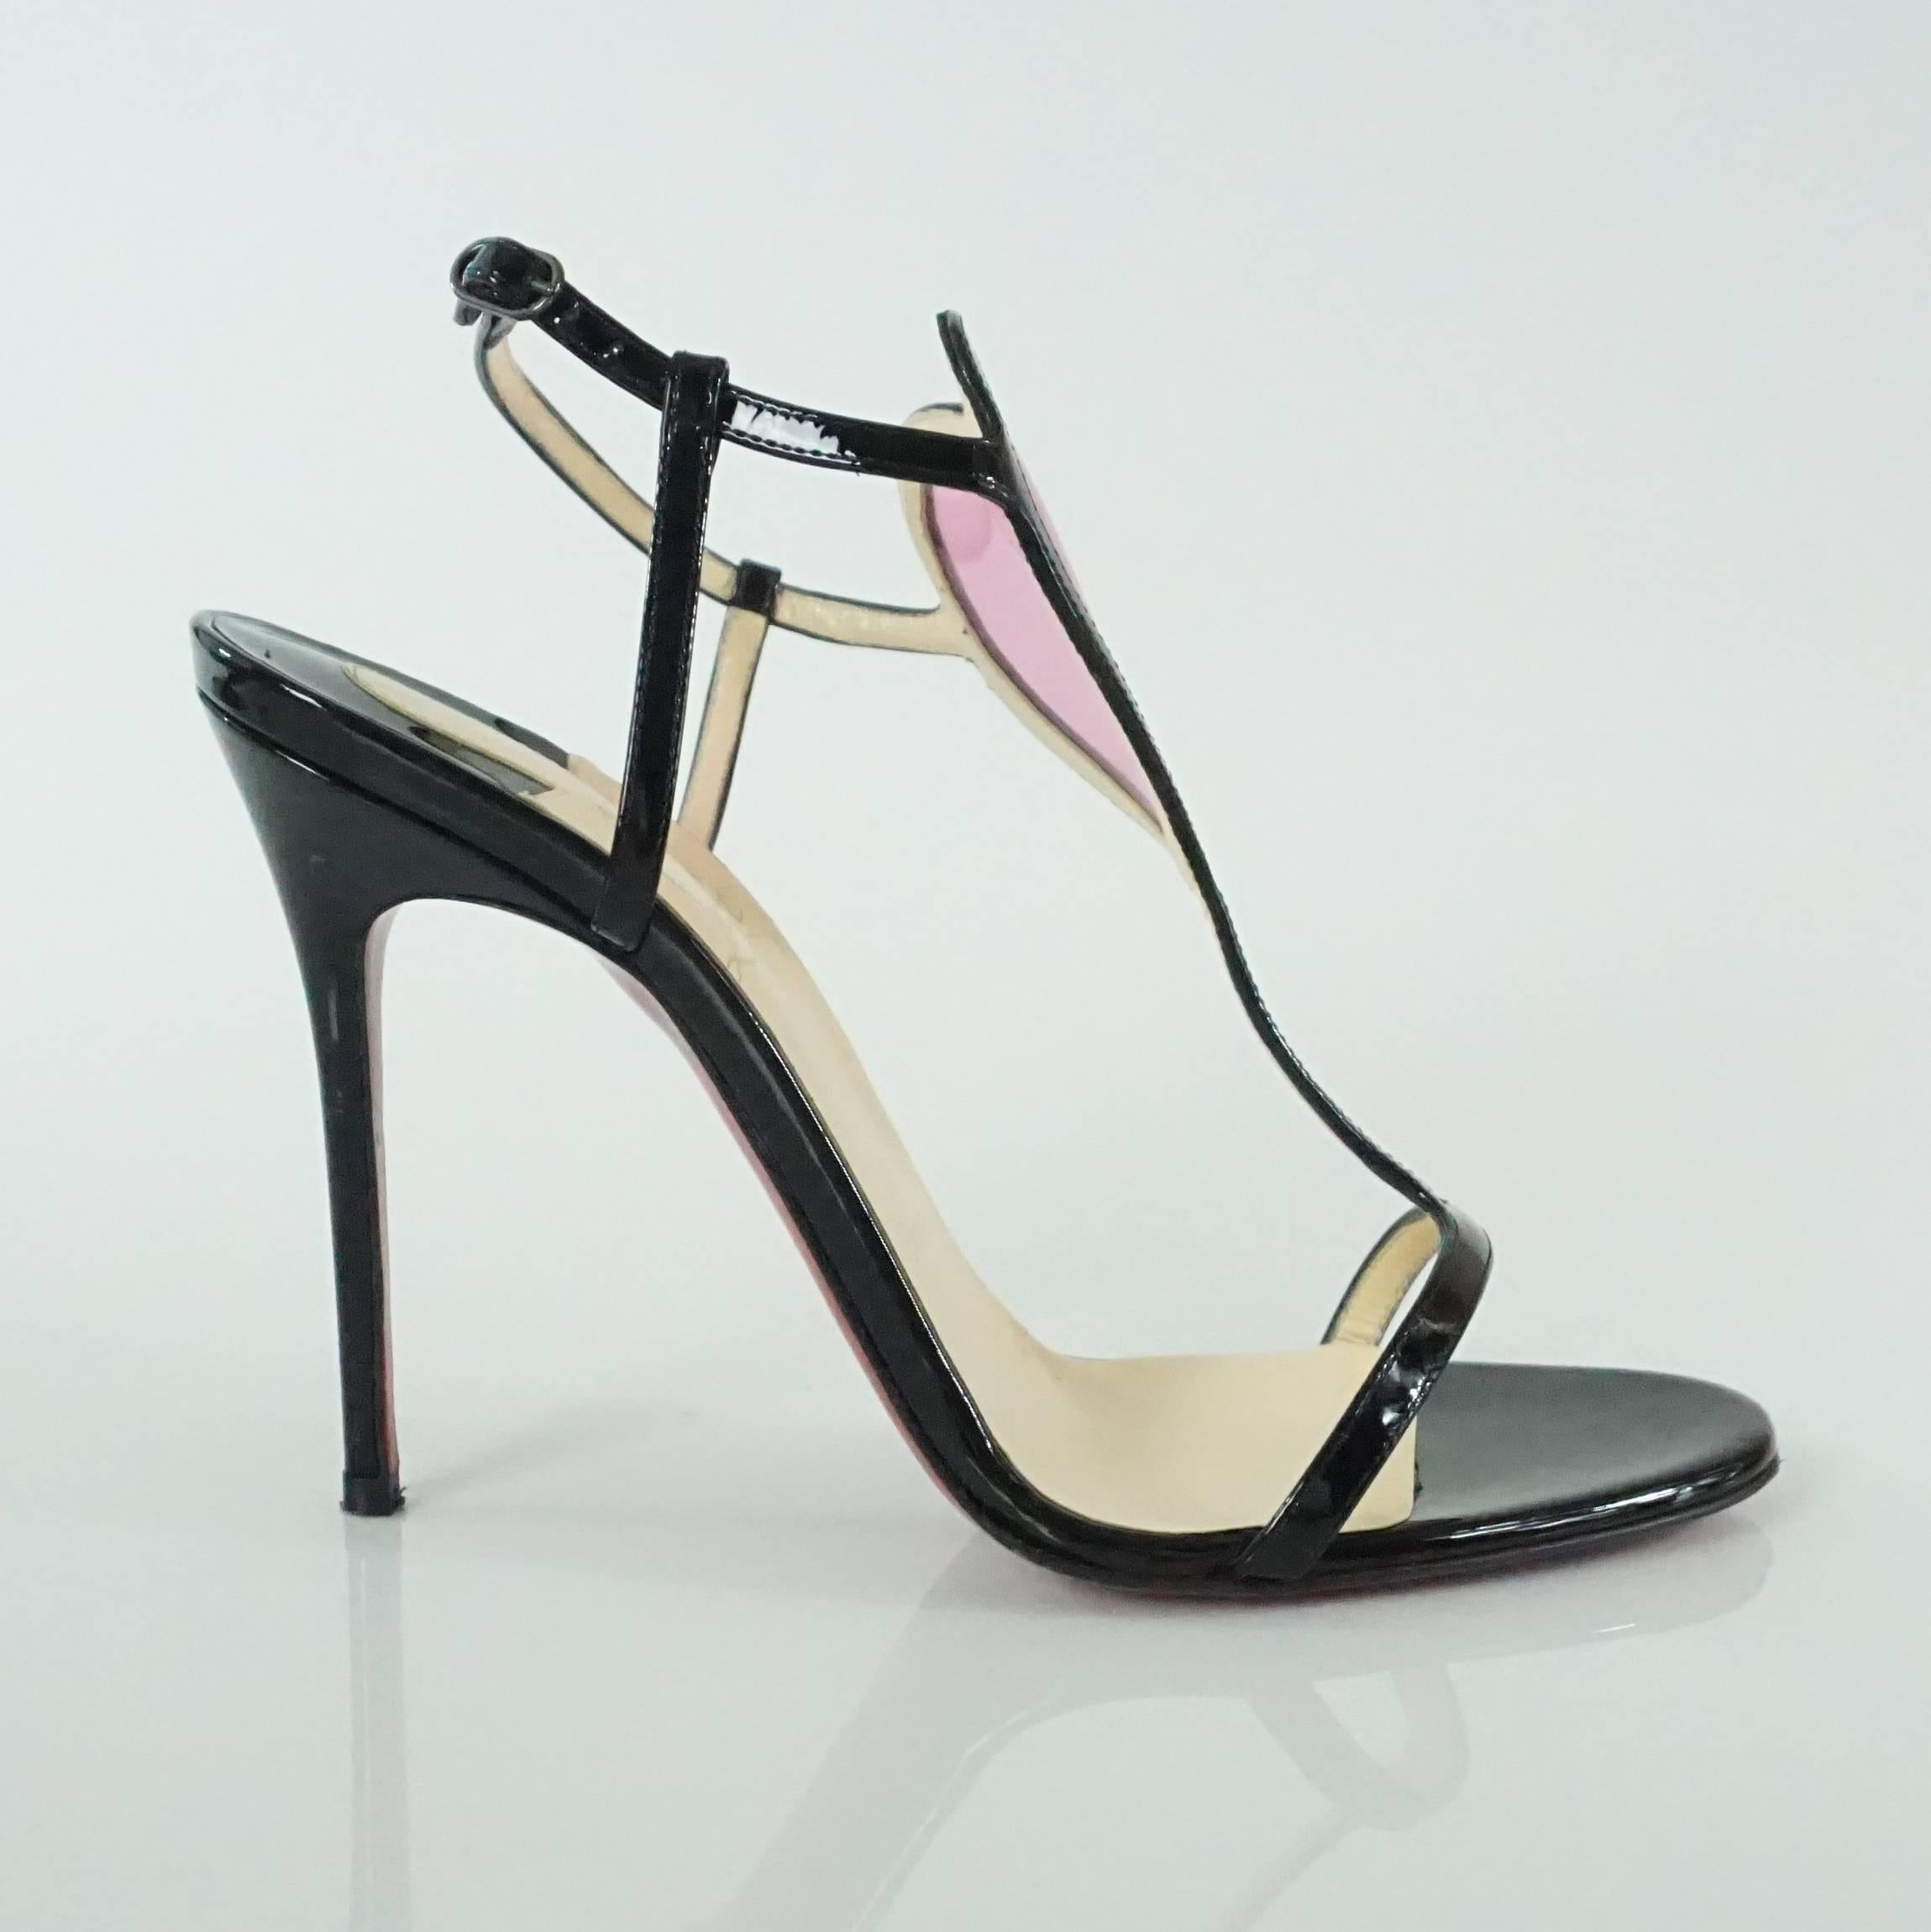 Christian Louboutin Black Patent and Pink PVC Cora Heart Heels - 37. These gorgeous heels have barely been worn and are in excellent condition. They have thin straps with a center heart and come with a duster and box. 

Heel Height: 4.25